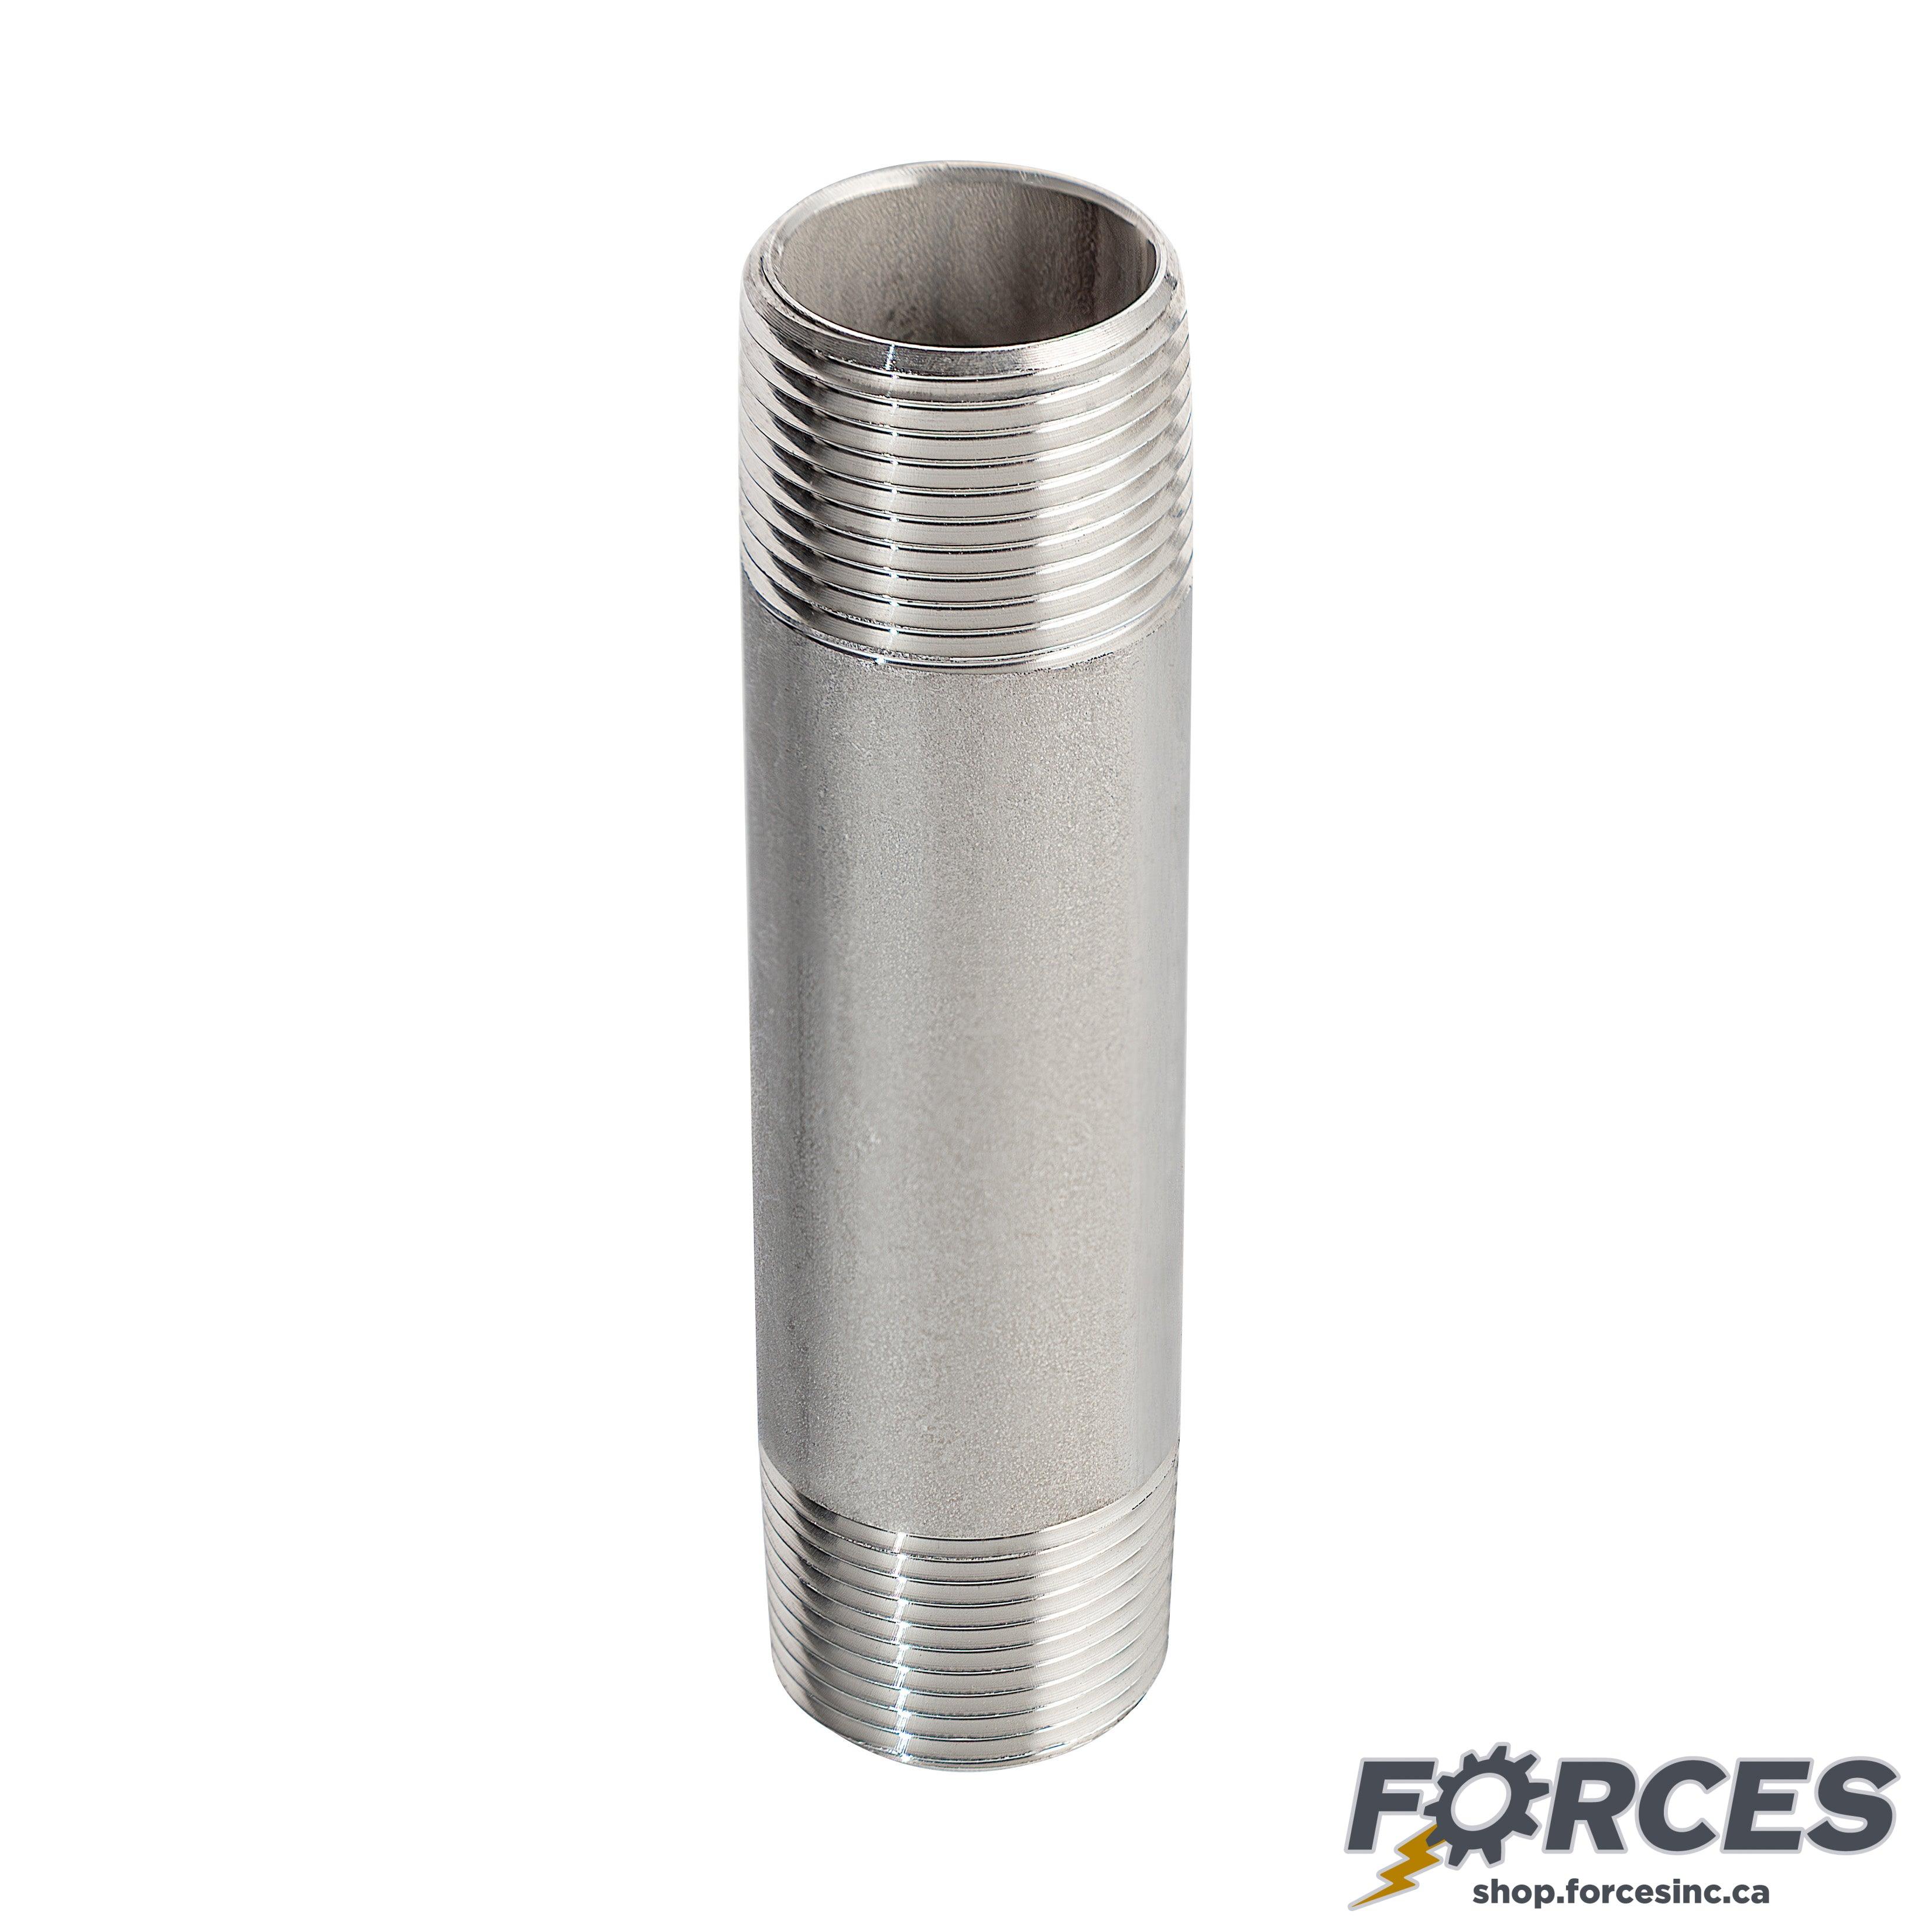 2" X 2-1/2" Long Nipple - Stainless Steel 316 - Forces Inc